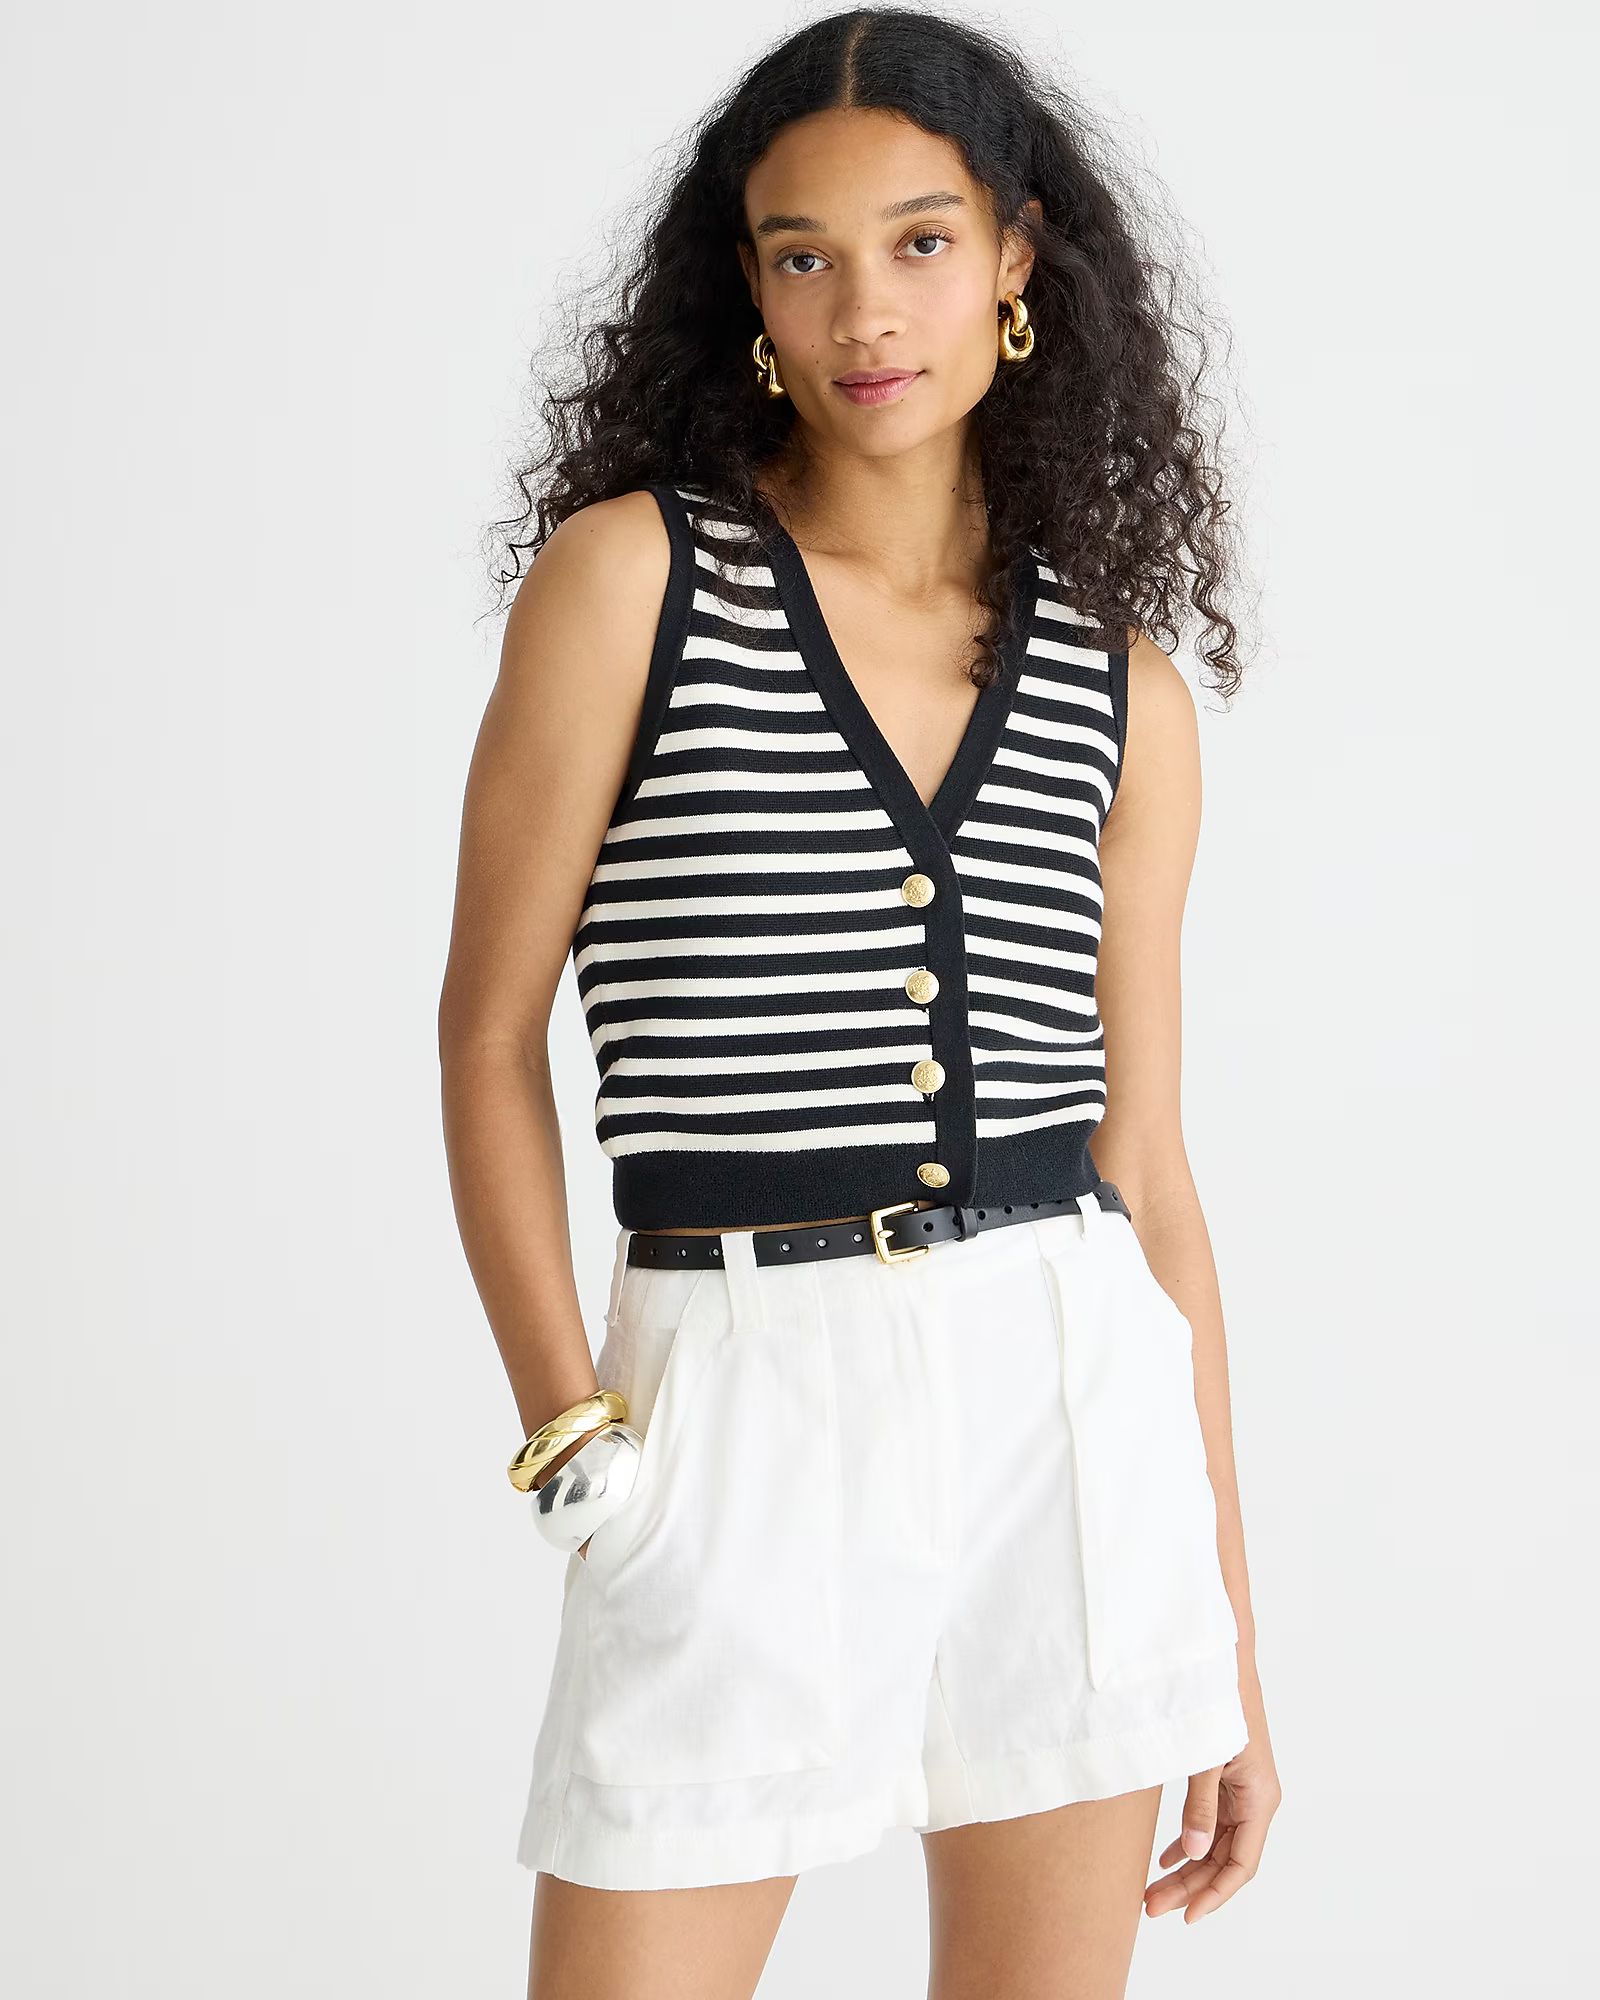 top rated4.6(52 REVIEWS)Emilie sweater-vest in stripe$89.50-$98.0030% off full price with code SH... | J.Crew US